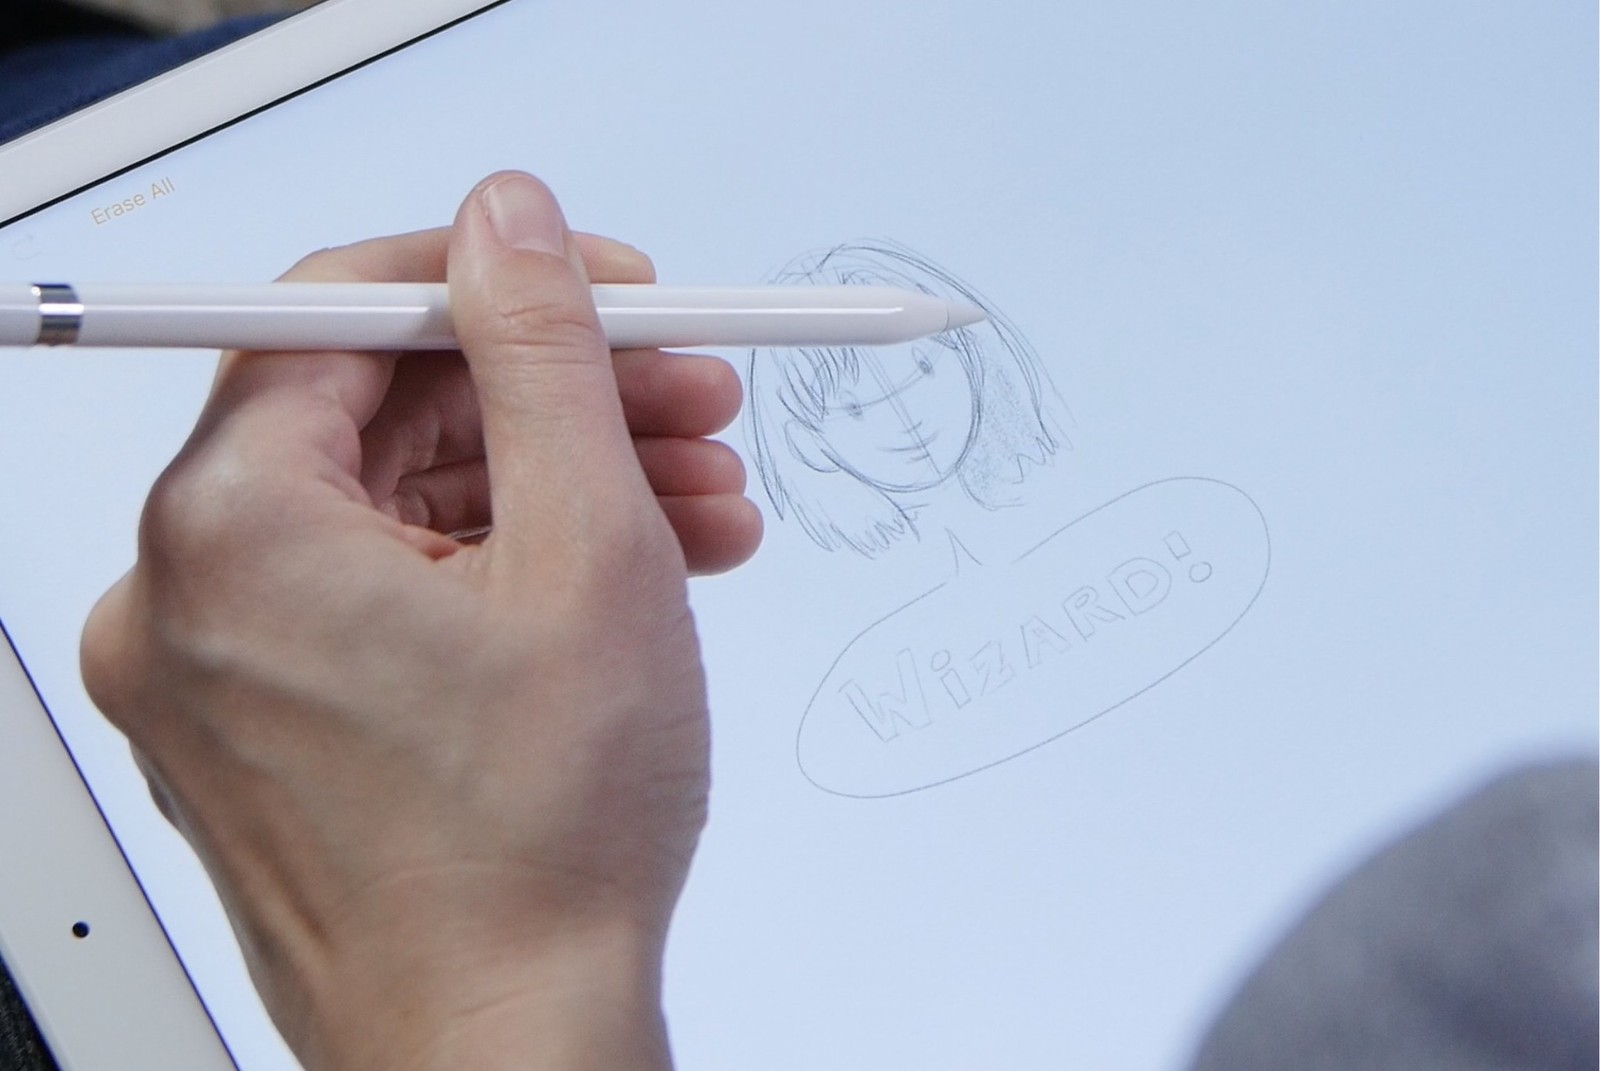 Linea Sketch latest version for iPad Pro ads Apple pencil gestures and